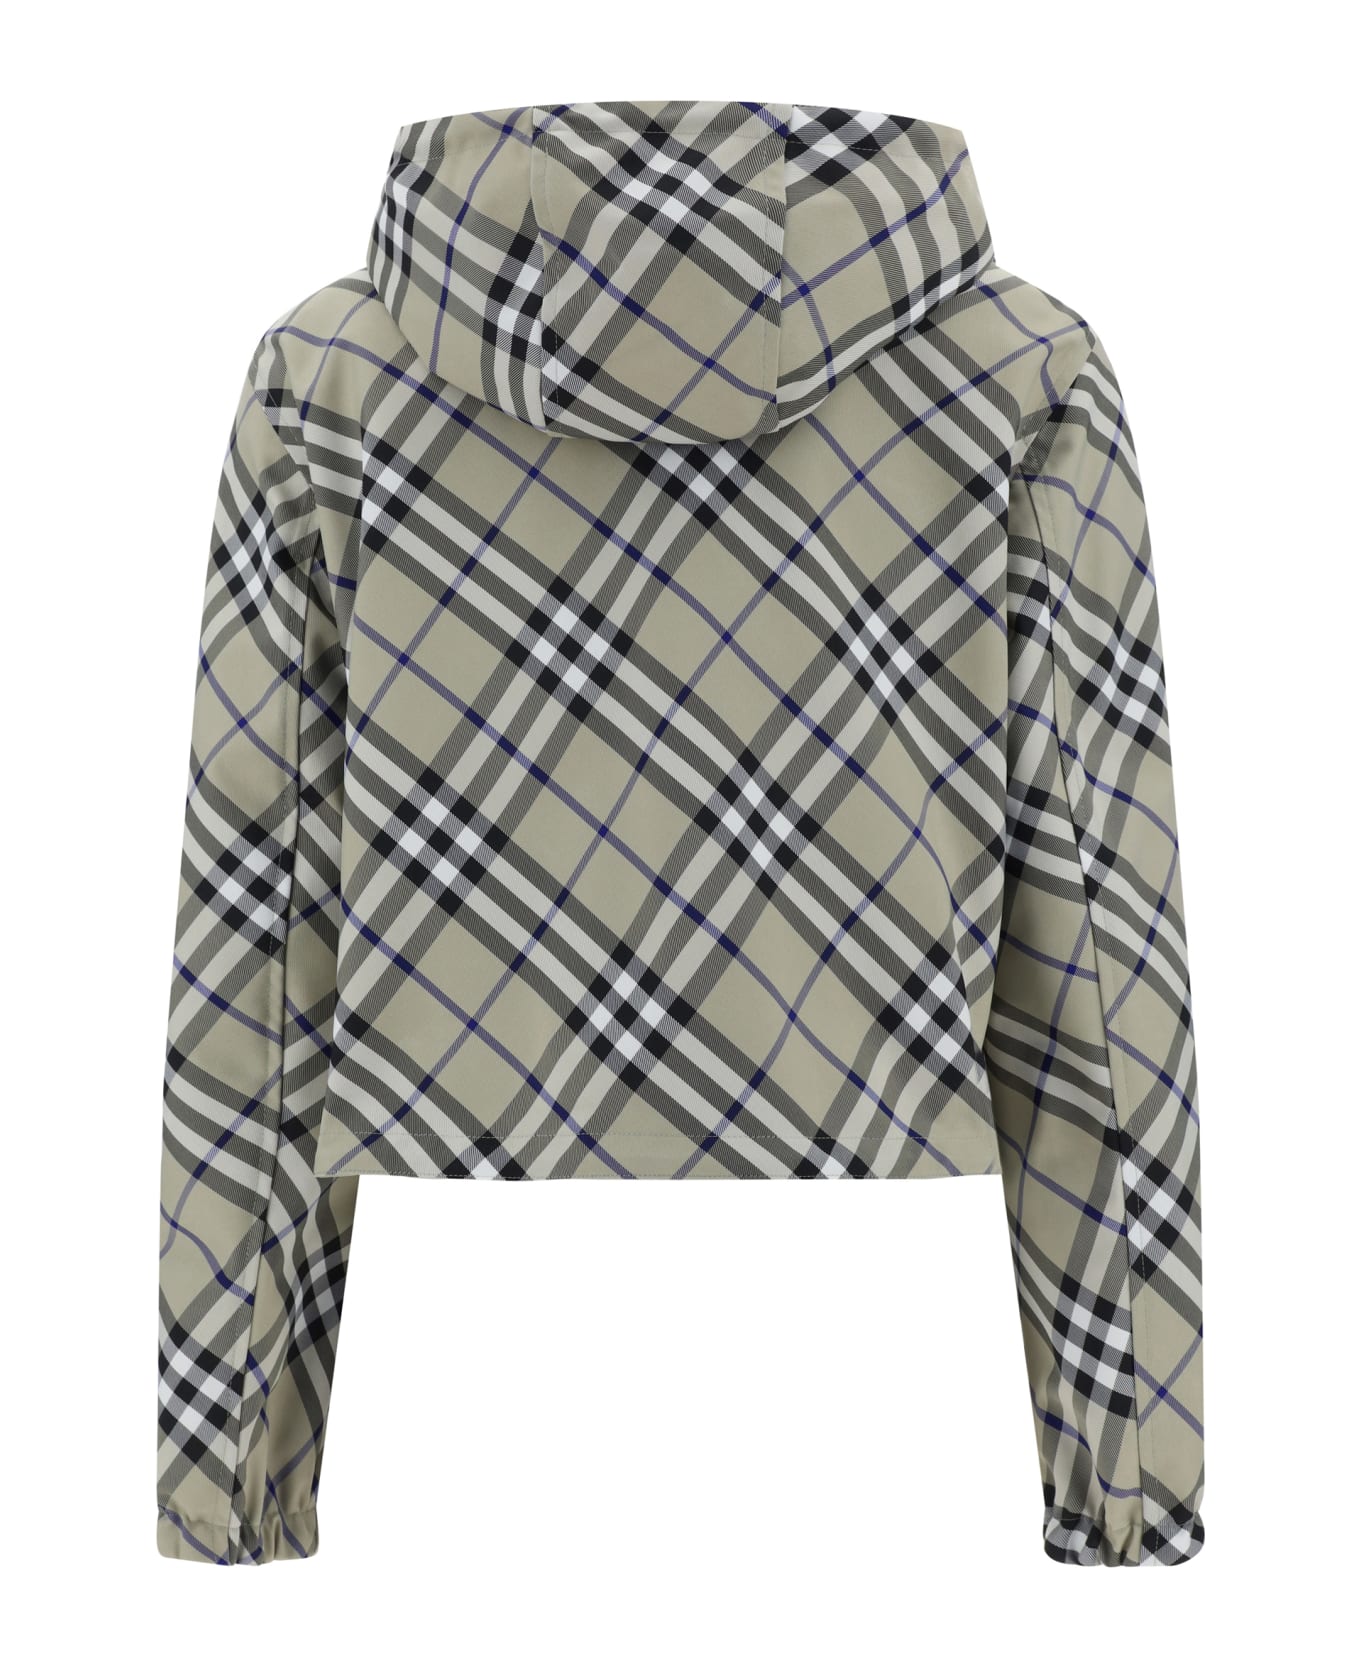 Burberry Reversible Cropped Checked Hooded Jacket - Lichen Ip Check